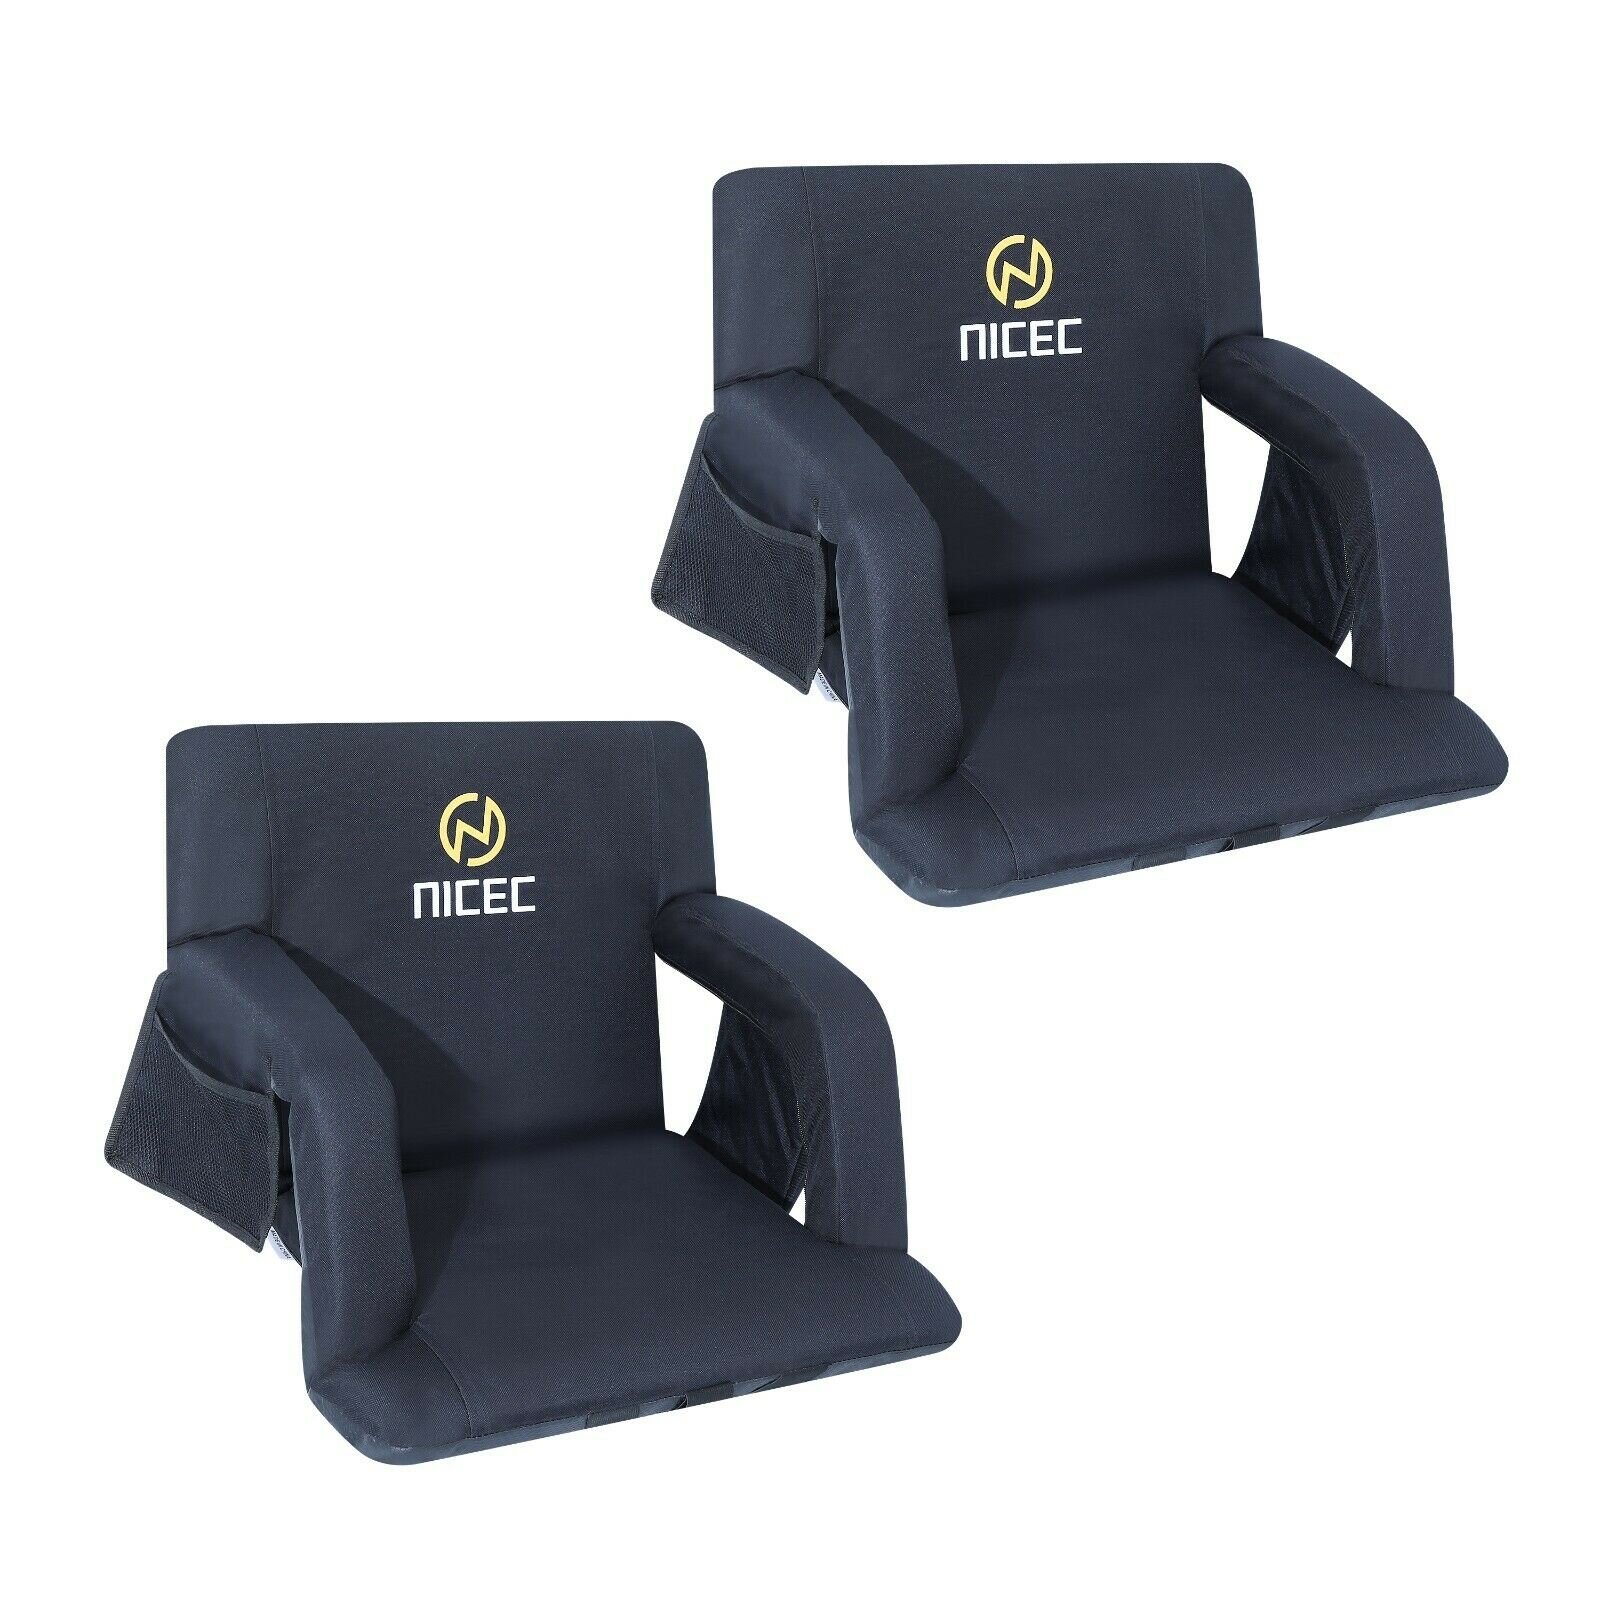 Stadium Seat Chair, 2 Pack- Bleacher Cushions with Padded Back Support, Armrests, 6 Reclining Positions and Portable Carry Straps by Home-Complete